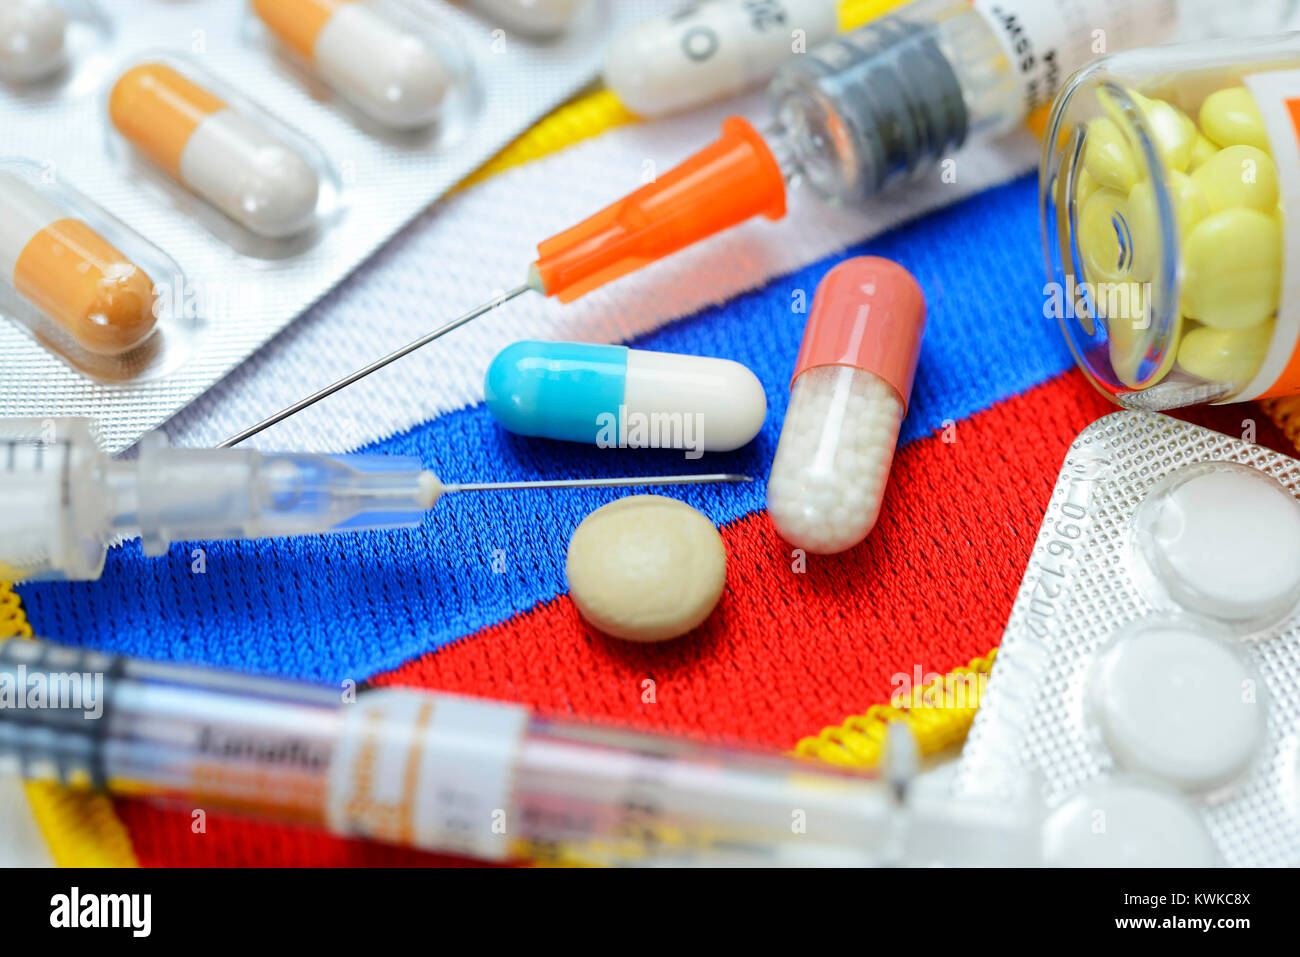 Tablets and syringes on Russia flag, doping scandal, Tabletten und Spritzen auf Russland-Fahne, Doping-Skandal Stock Photo